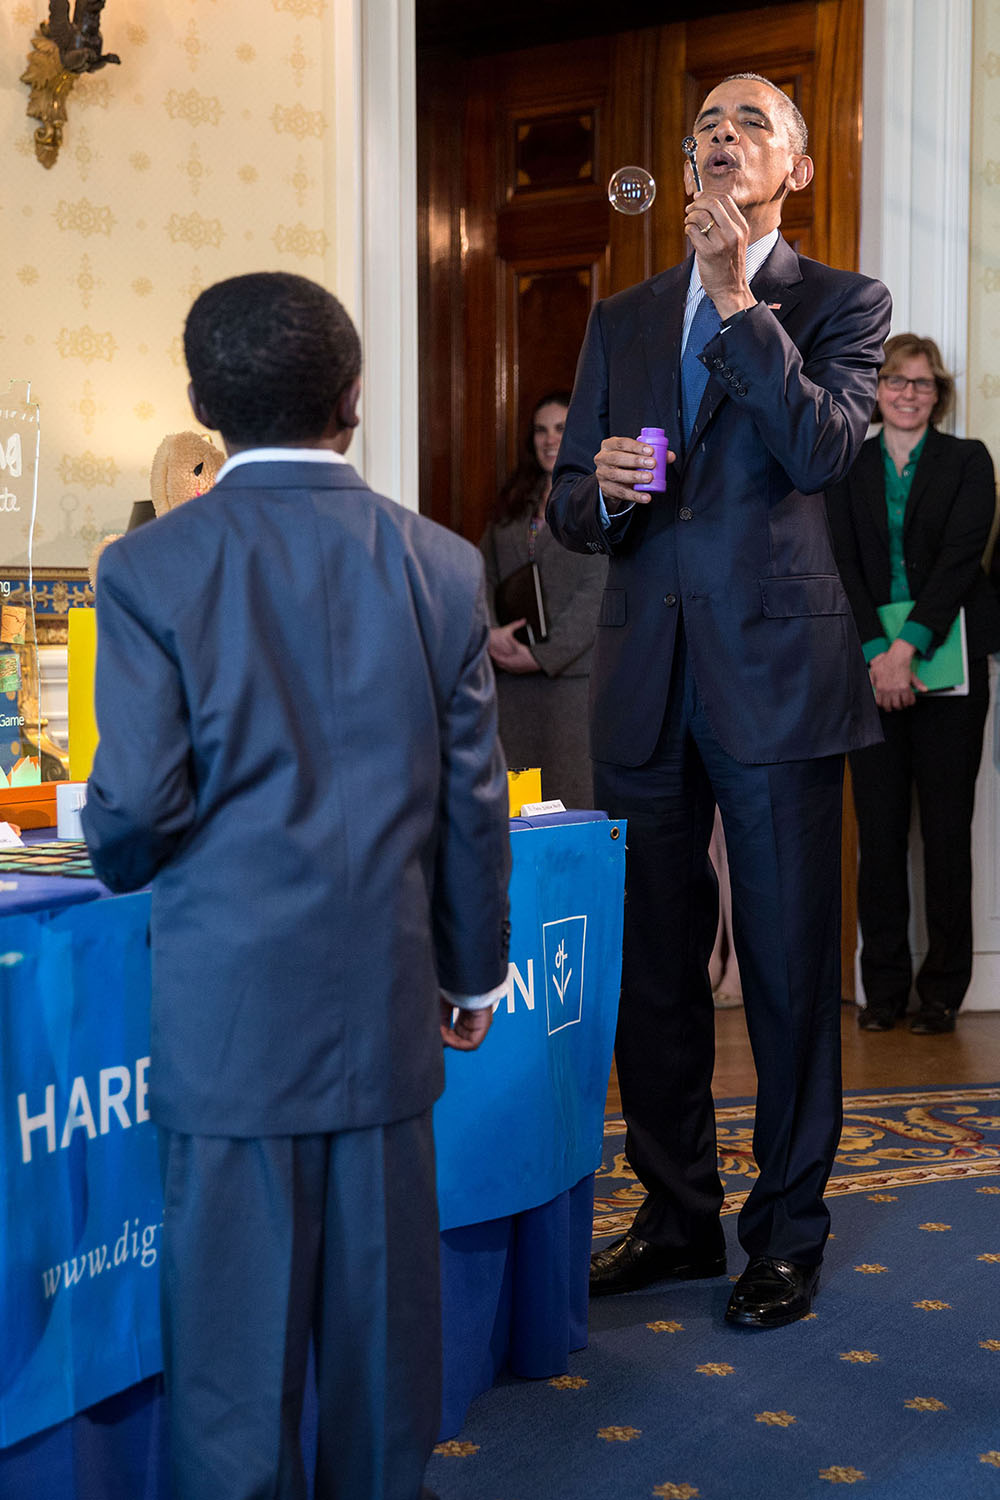 President Barack Obama blows a bubble while talking with nine-year-old Jacob Leggette about his experiments with additive and subtractive manufacturing with a 3D printer, his project that was part of the White House Science Fair in the Blue Room of the White House, April 13, 2016. (Official White House Photo by Pete Souza)